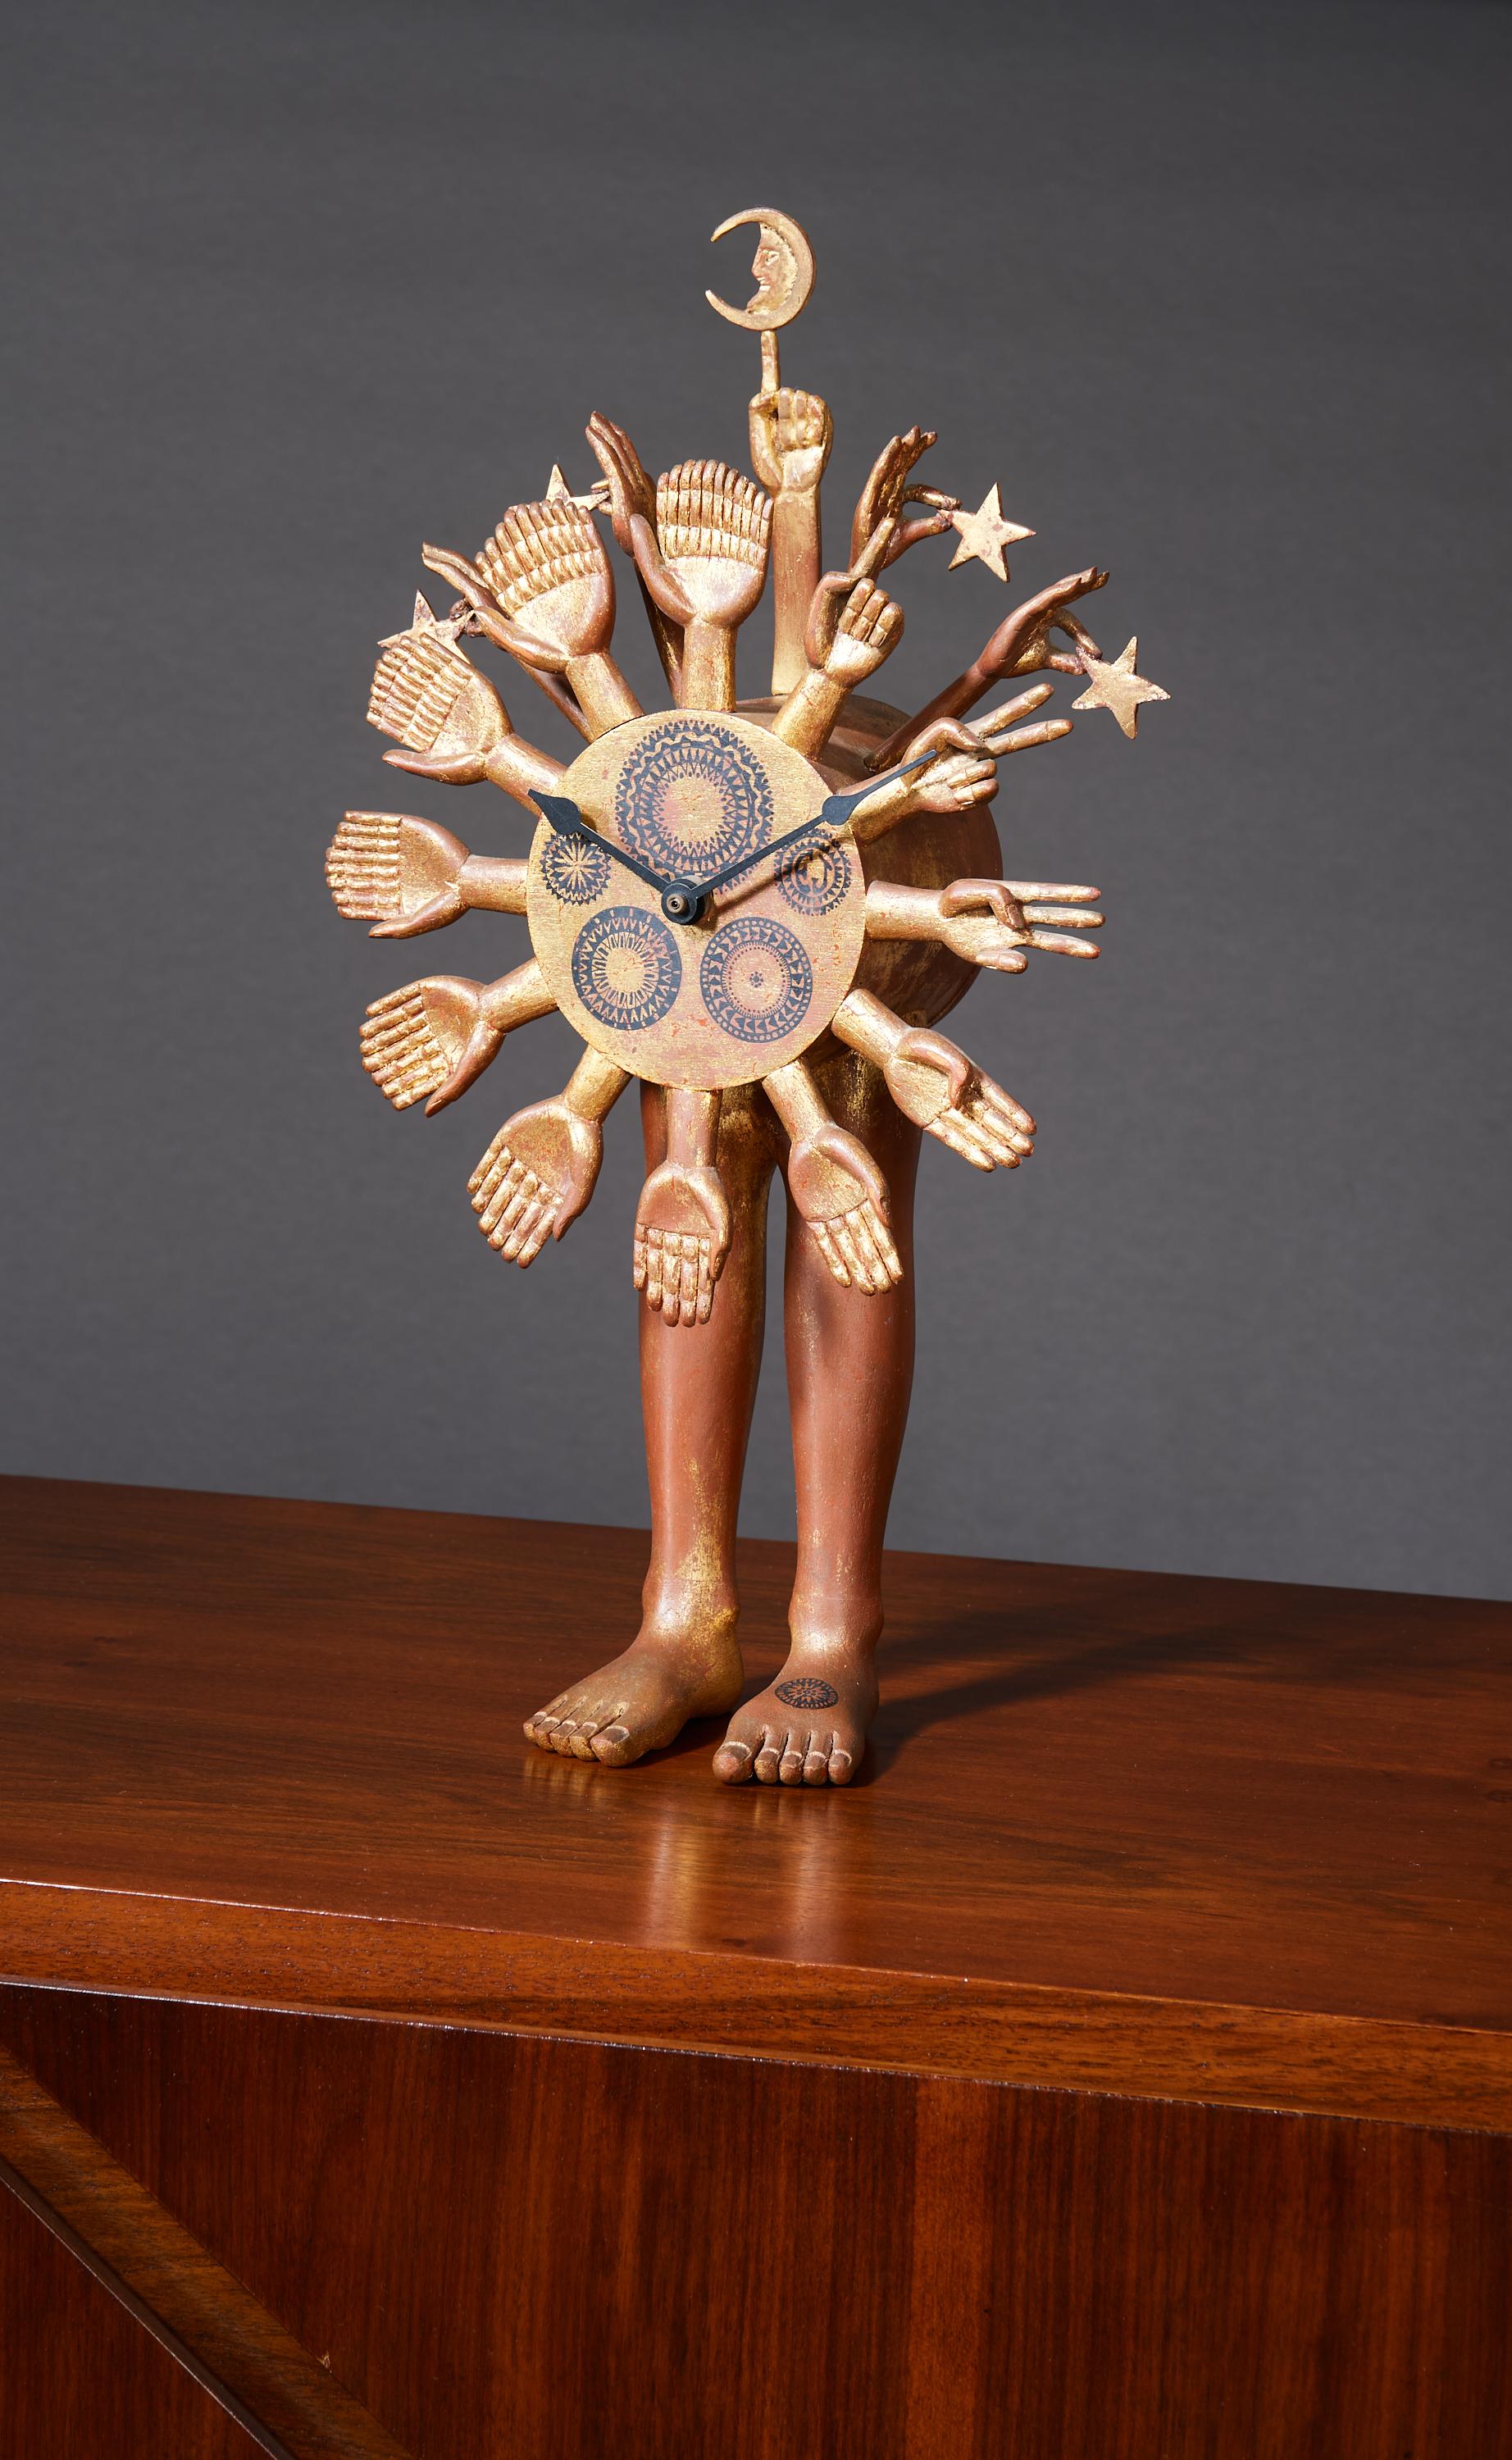 Pedro Friedeberg (b. 1937)

An exceptional, dreamlike Astroclock sculpture by Mexican Surrealist master Pedro Friedeberg, in carved and gold-leafed mahogany enriched by striking painted overlay — a rare addition for the artist. Twelve fantastical,